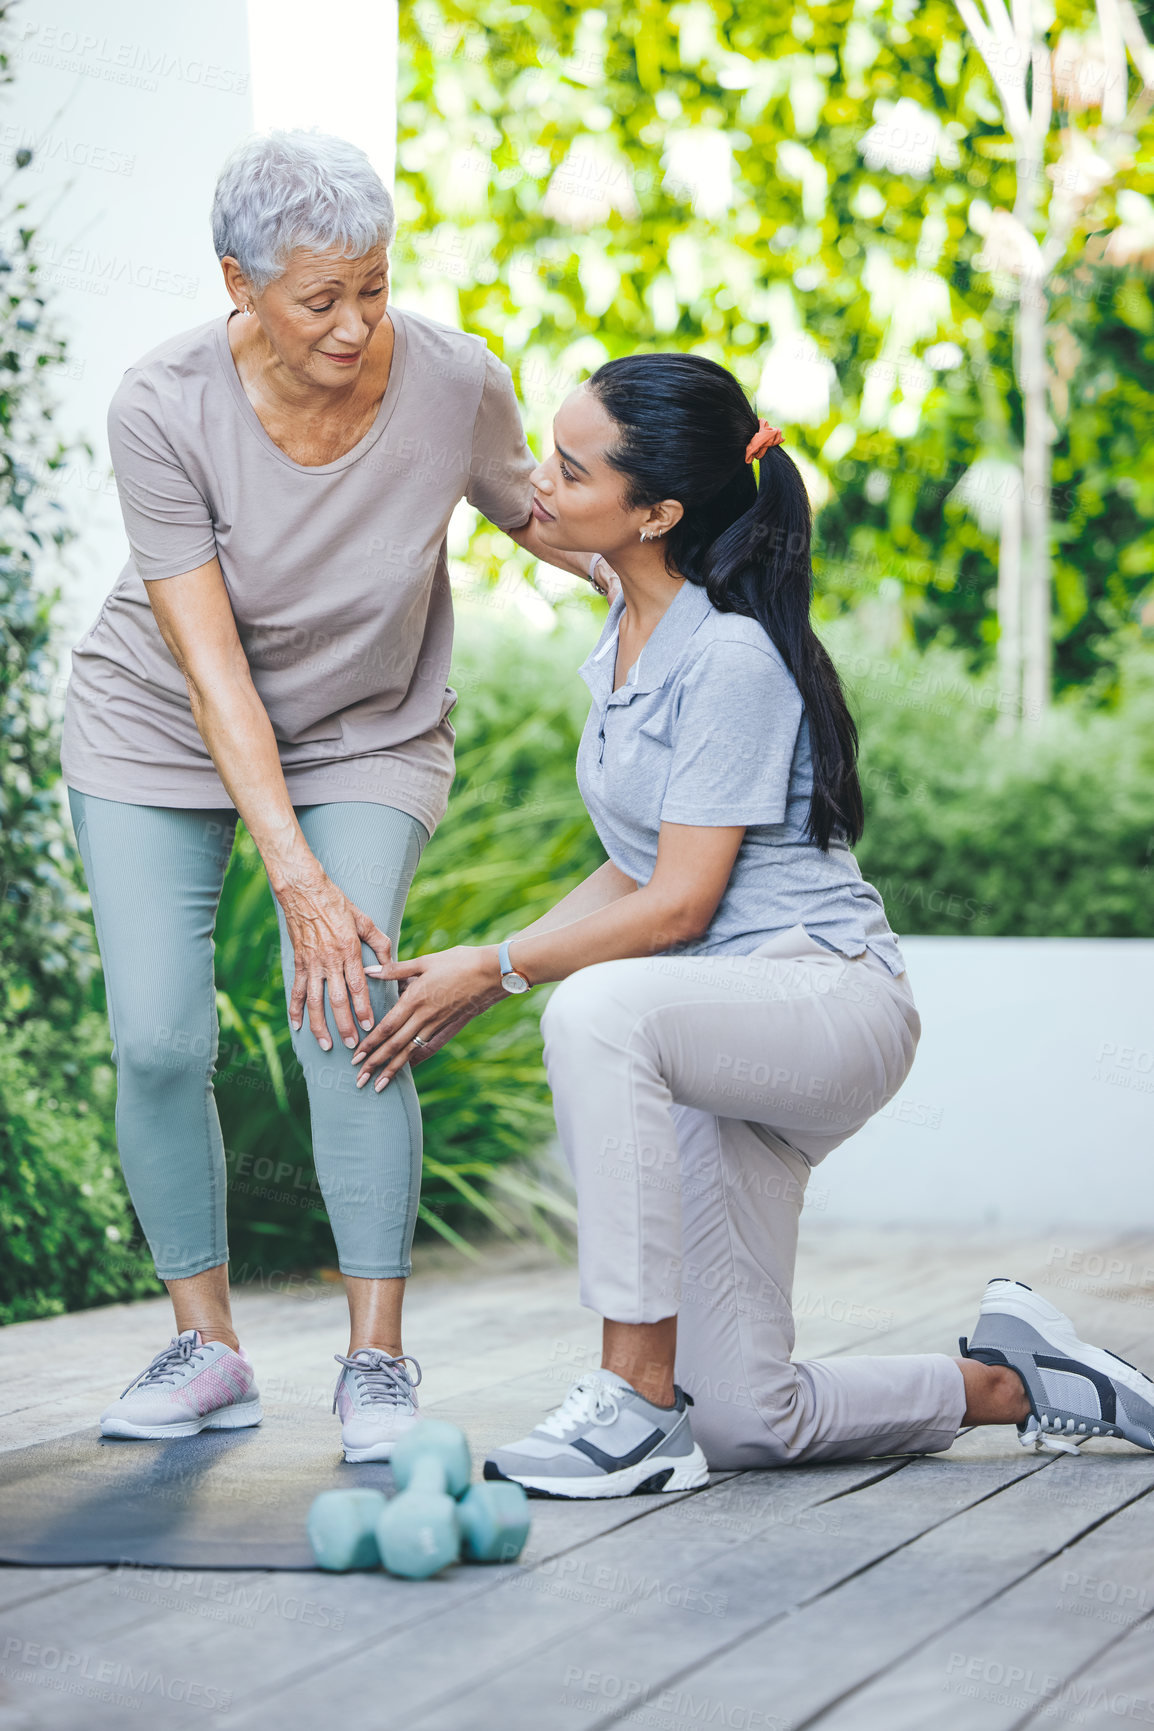 Buy stock photo Shot of an older woman holding an injured knee during a session with a physiotherapist